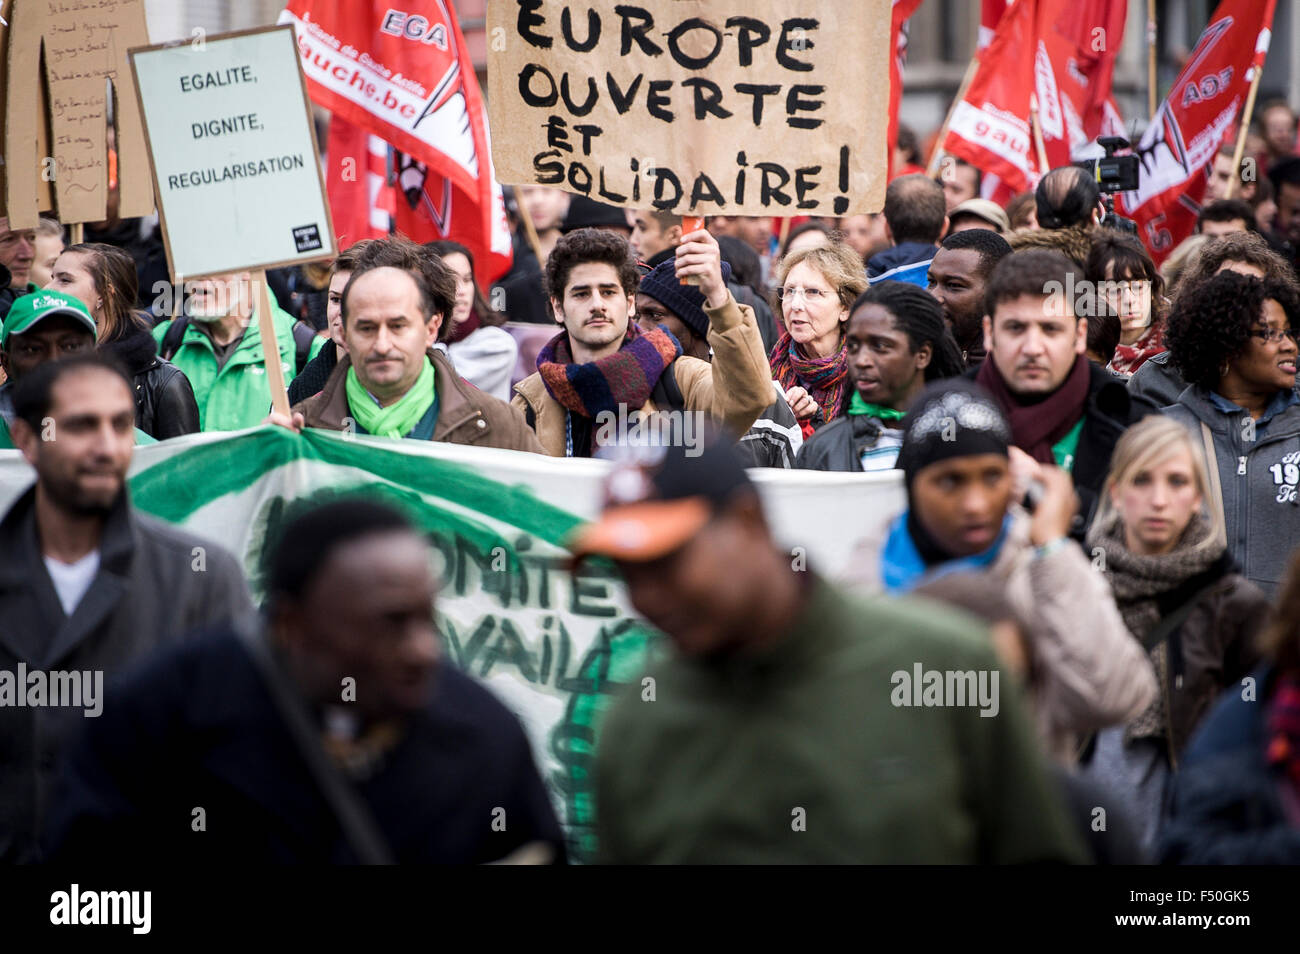 Brussels, Belgium. 25th October, 2015. Refugees hold the protest in Brussels, Belgium on 25.10.2015 . About 3.000 refugees without papers (sans papiers) rally in demand of regularization of undocumented migrants, closure of the detention centers and ending of the deportations. The same time Eu head of states meet in Brussels to discuss the migration crisis Credit:  dpa picture alliance/Alamy Live News Stock Photo